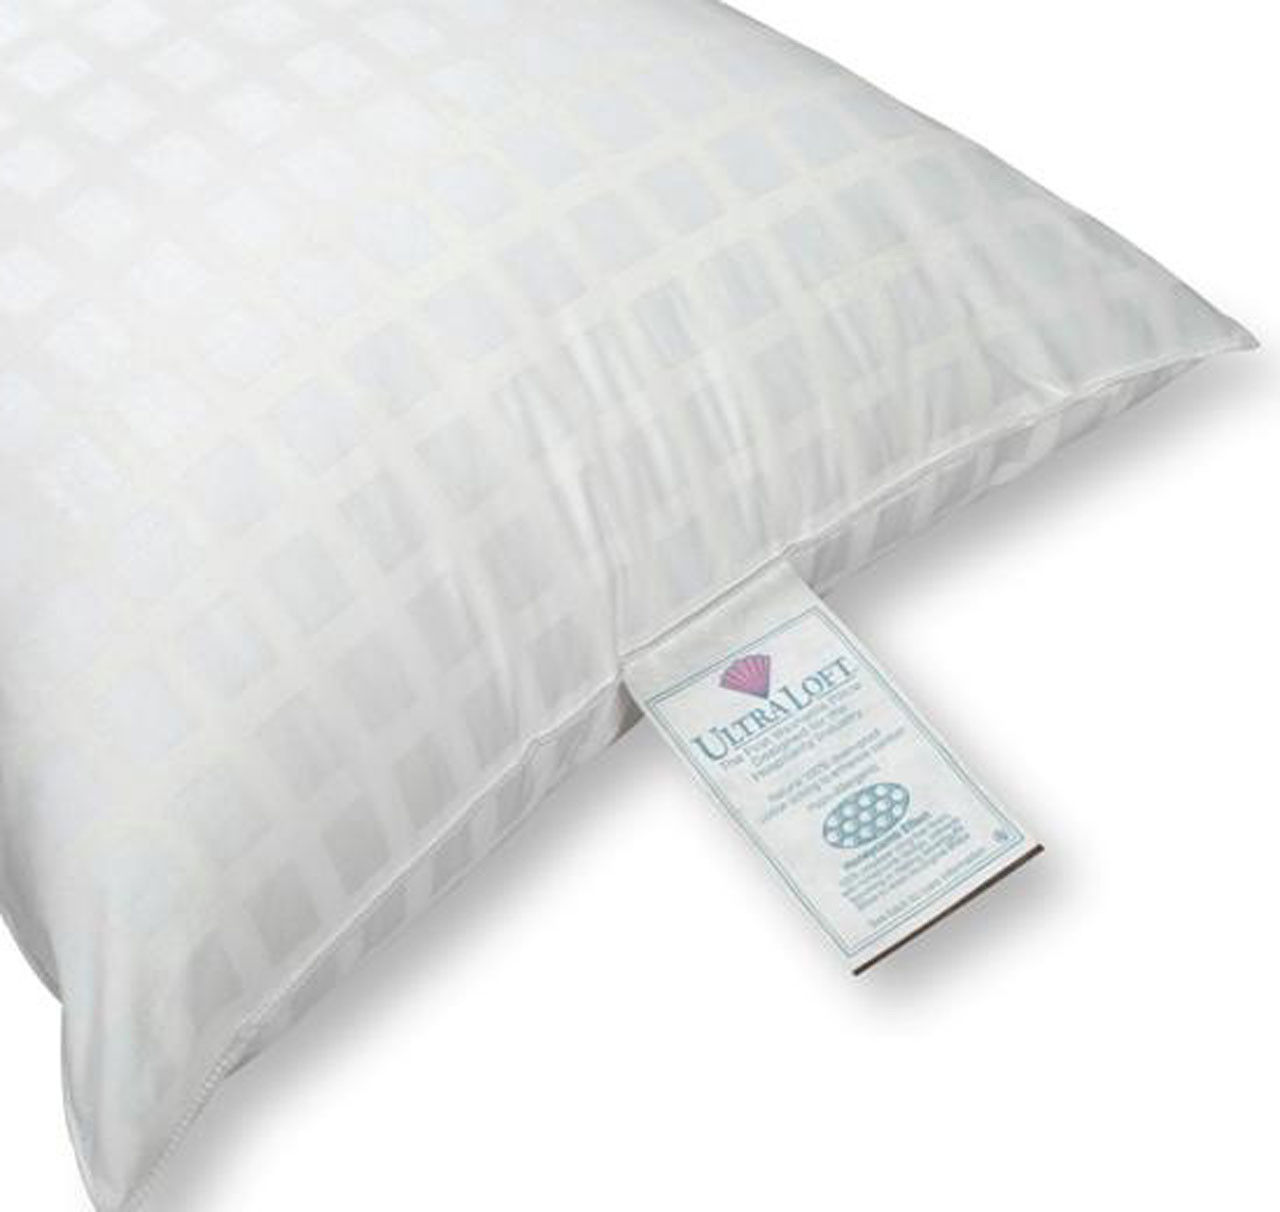 Does the UltraLoft Pillow, with its Honeycomb Fiber Effect, cause allergies?